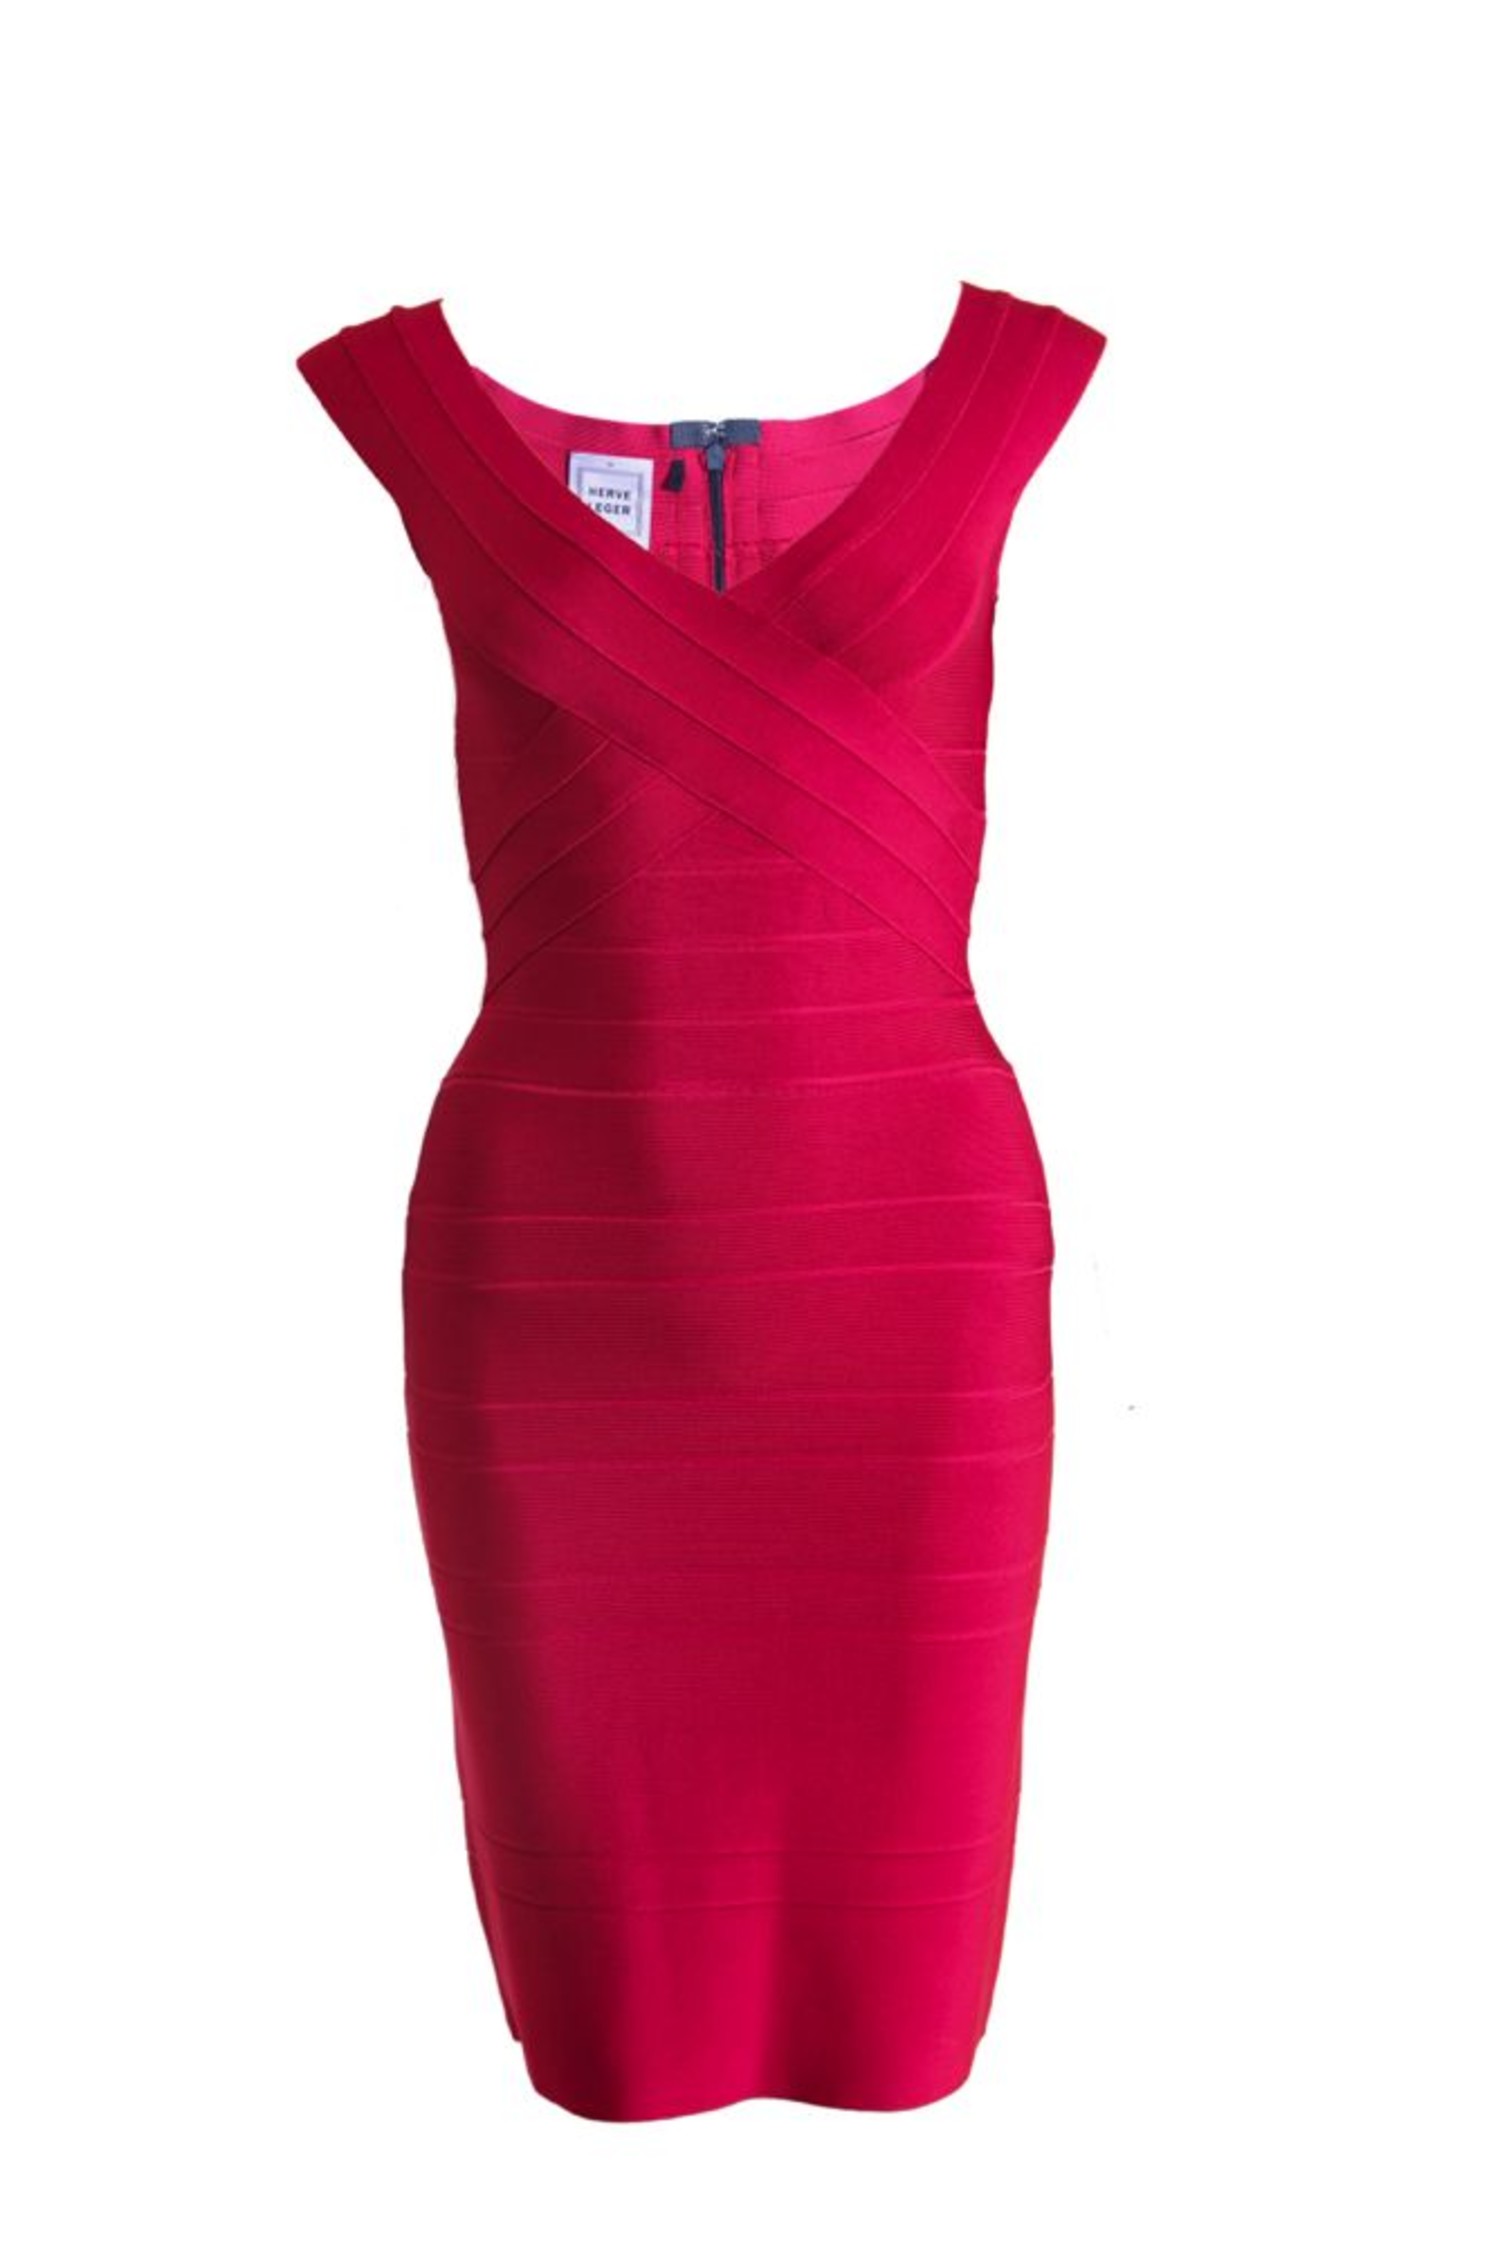 Herve Leger, Rasperry red bodycon dress with black stripe on the